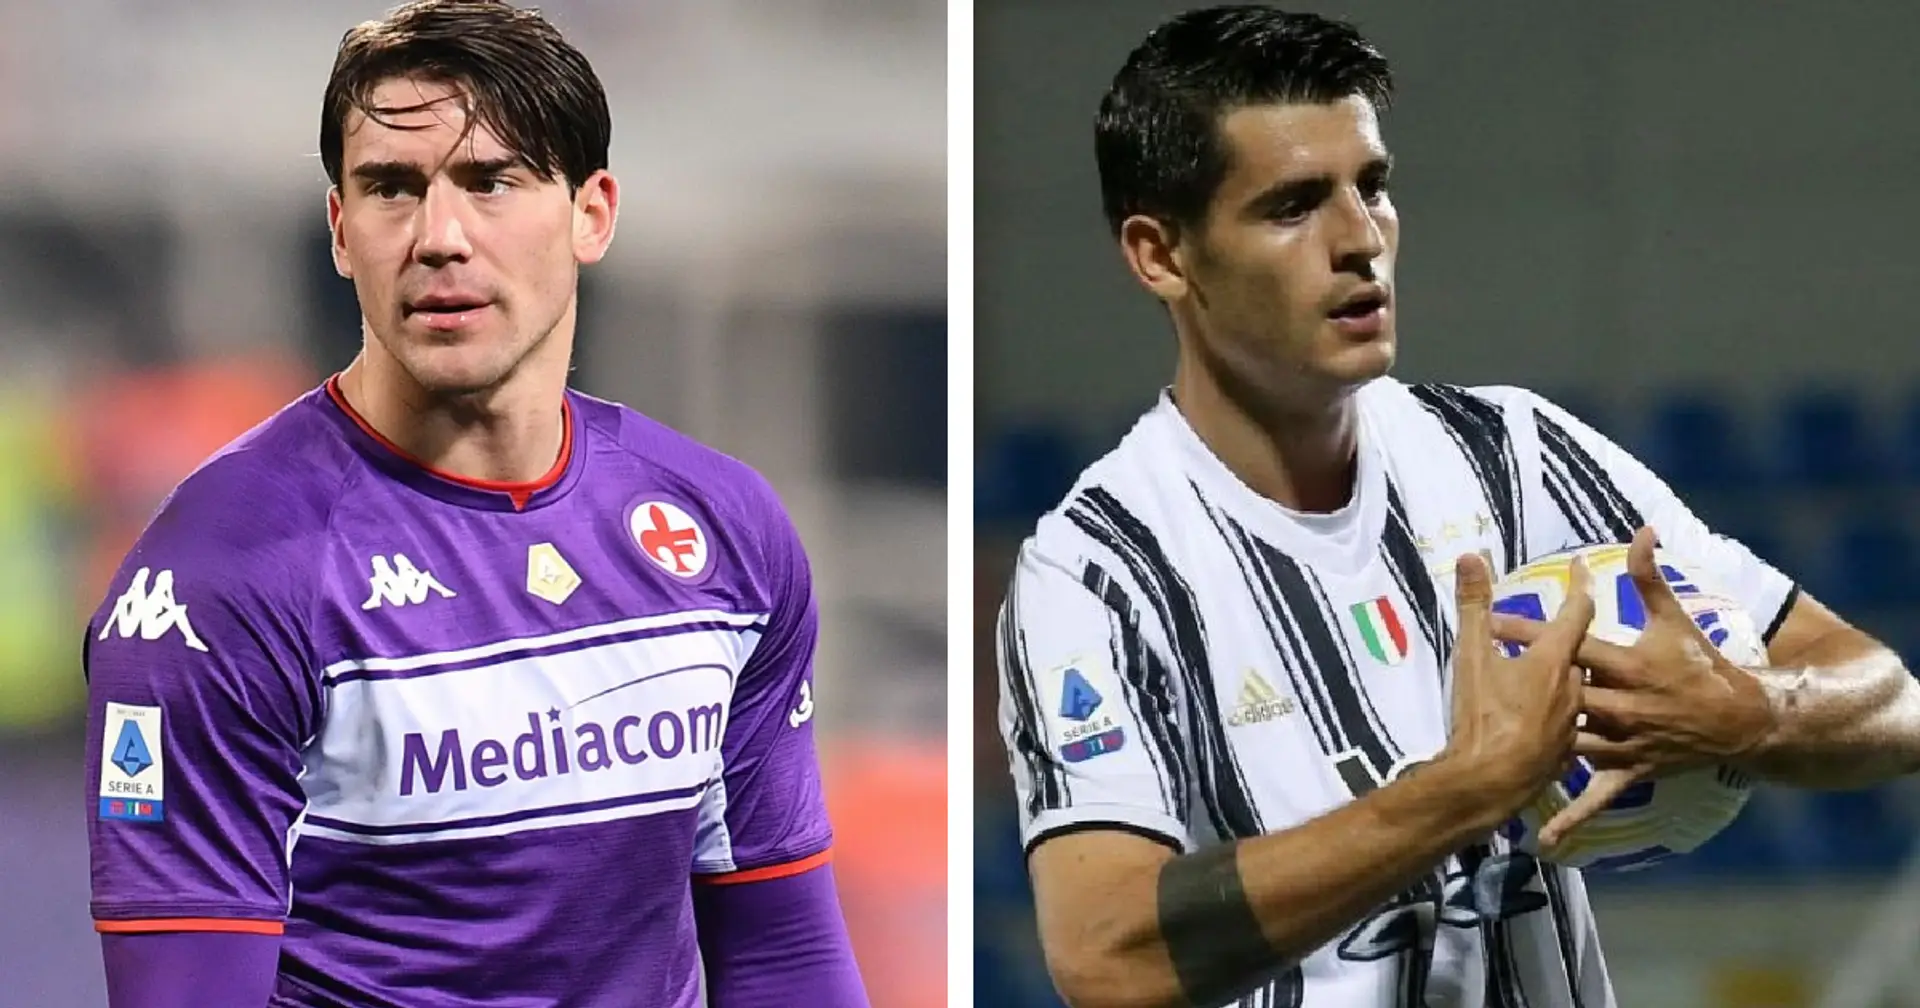 Morata to become a Barca player in a matter of days as Juve moves for Vlahovic (reliability: 4 stars)